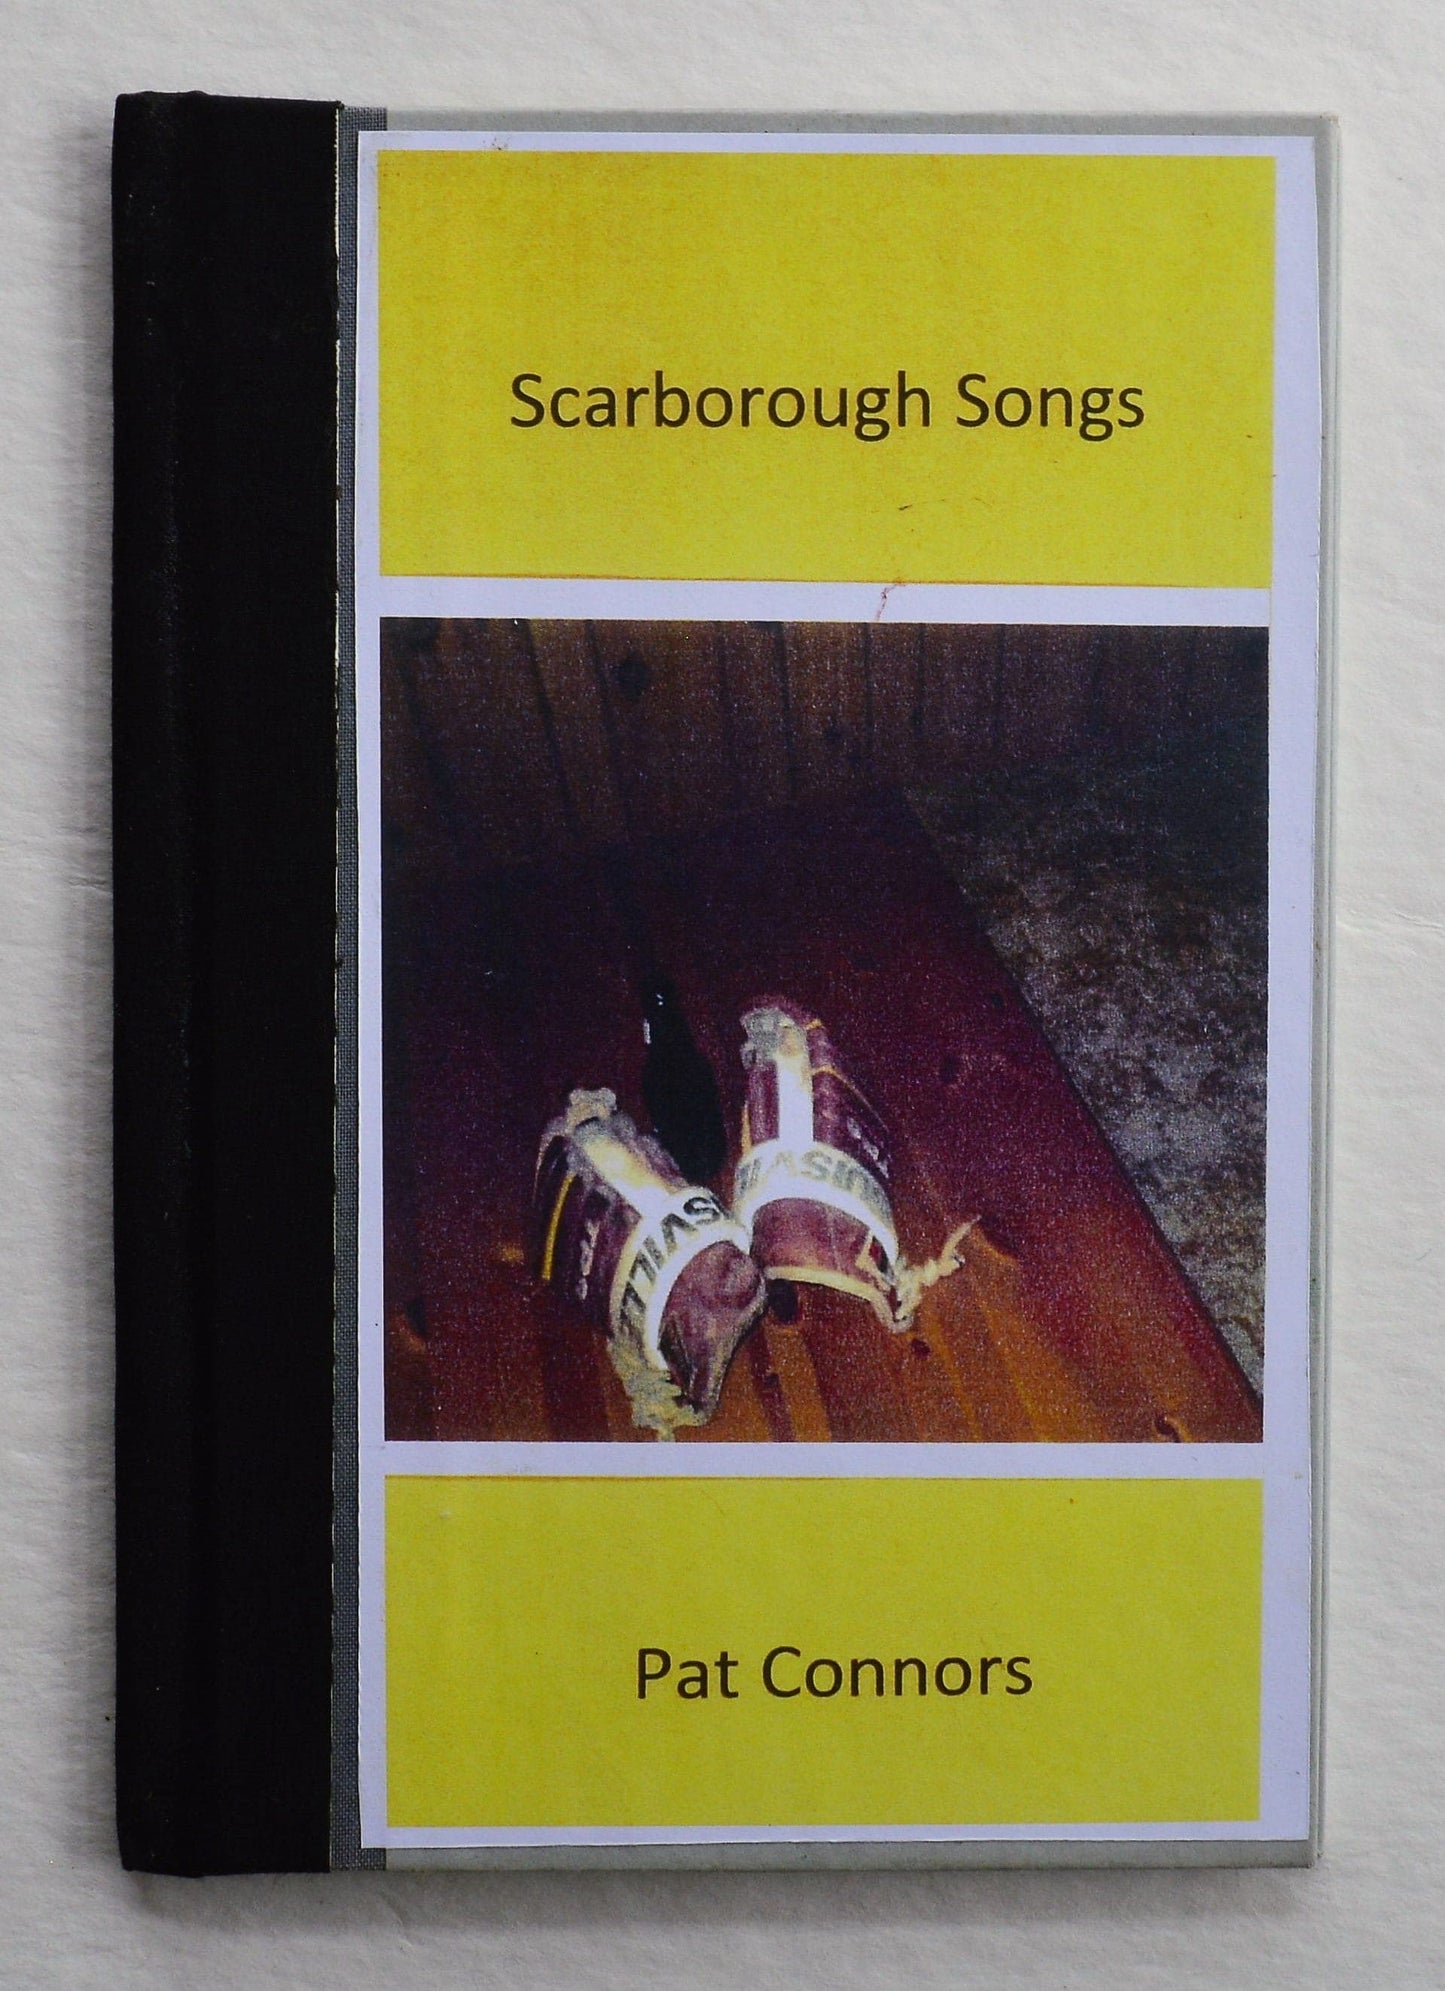 Scarborough Songs - Pat Connors